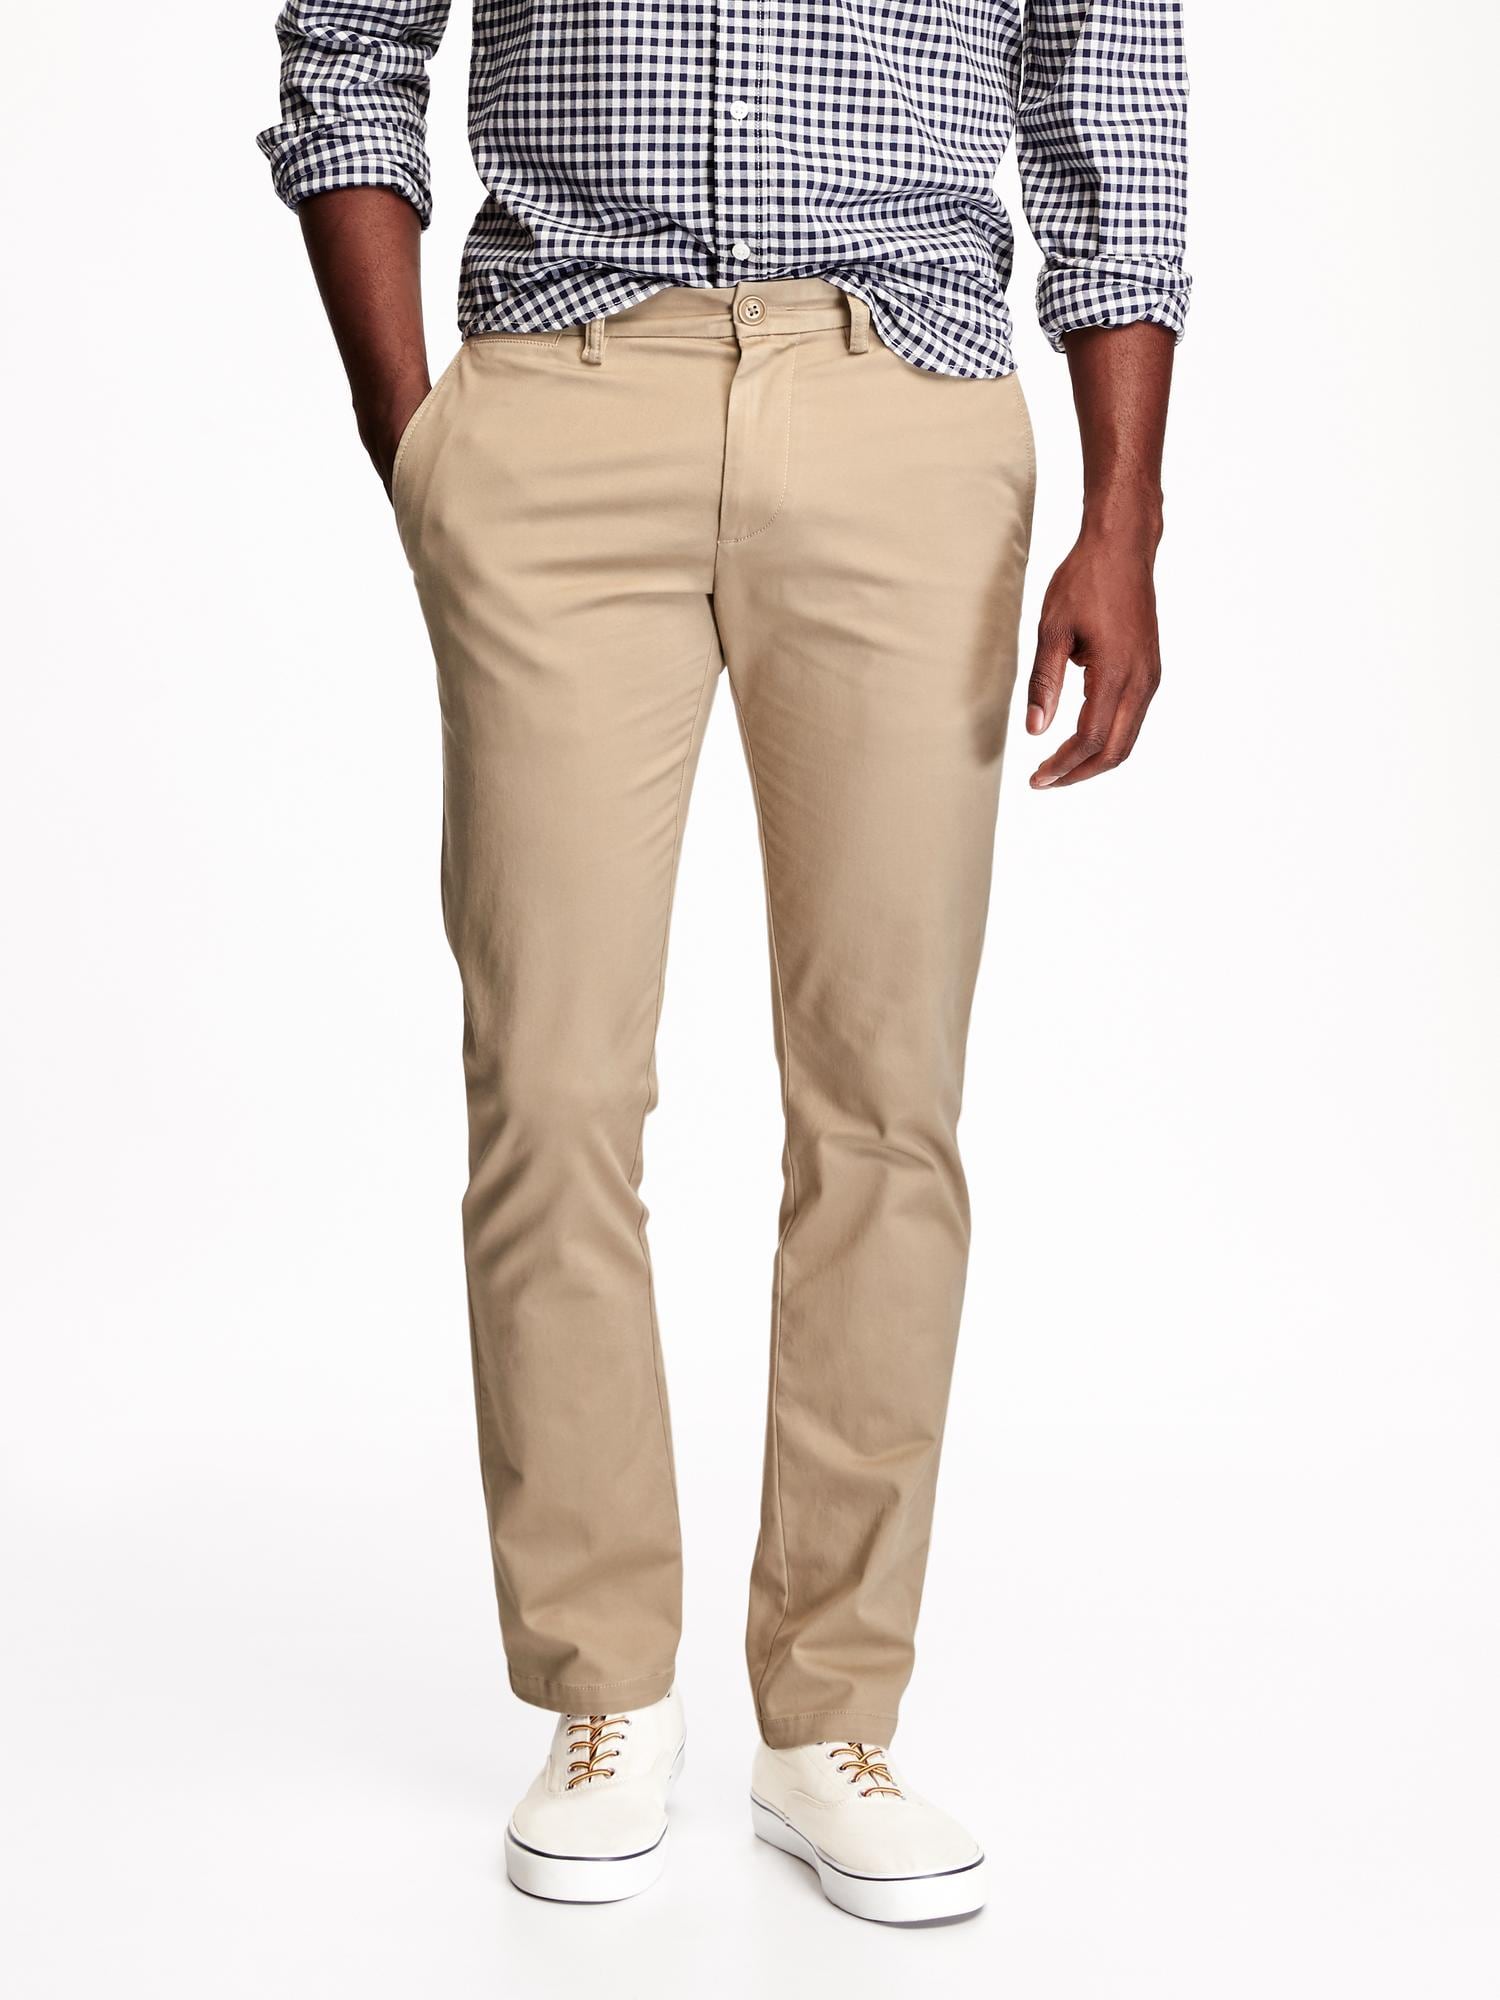 Slim Ultimate Built-In Flex Chinos for 